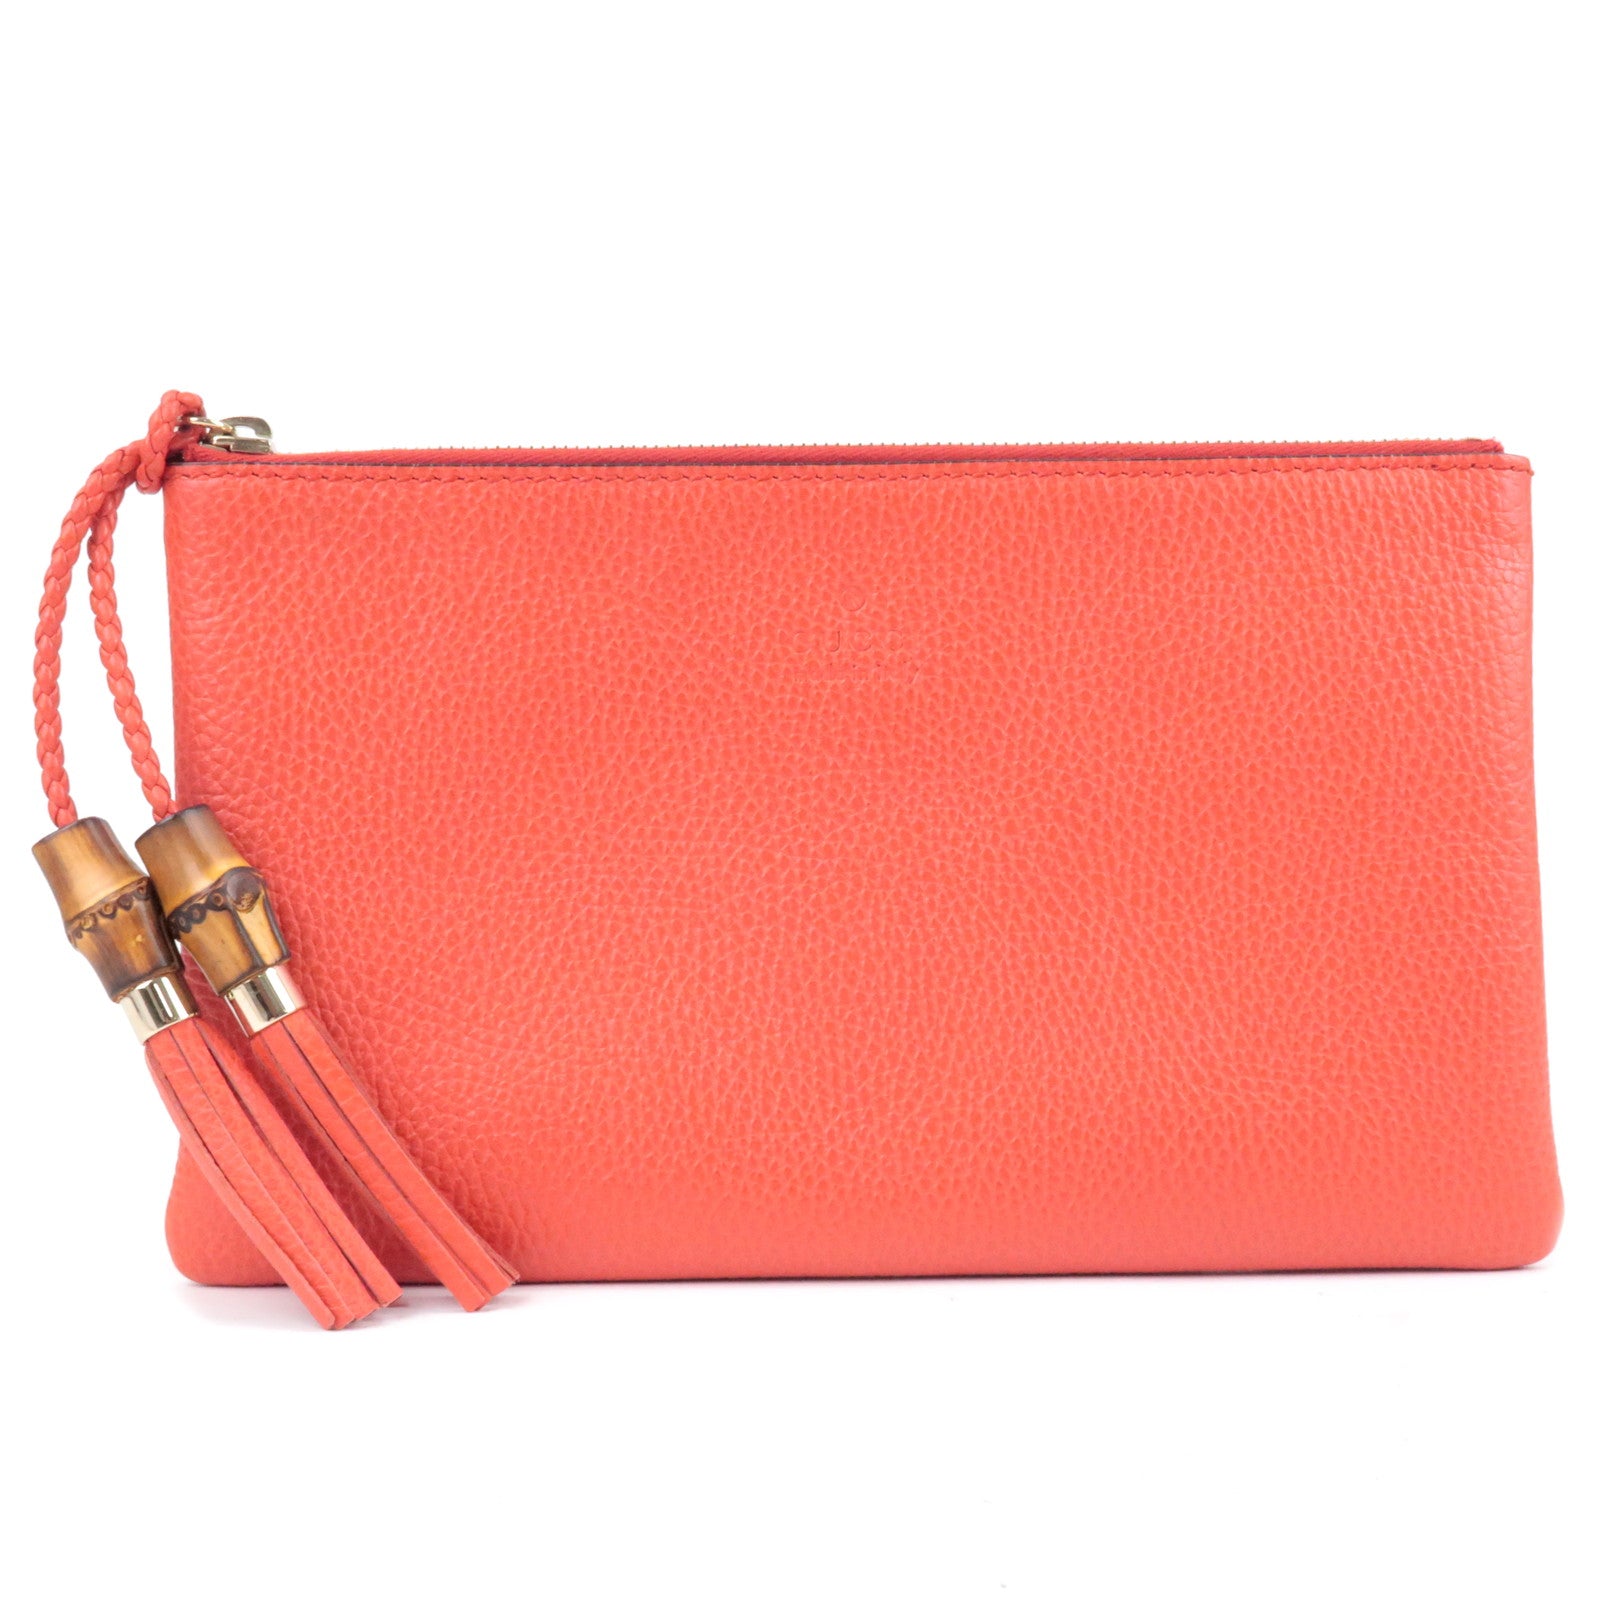 GUCCI-Leather-Bamboo-Pouch-Clutch-Bag-Red-376854